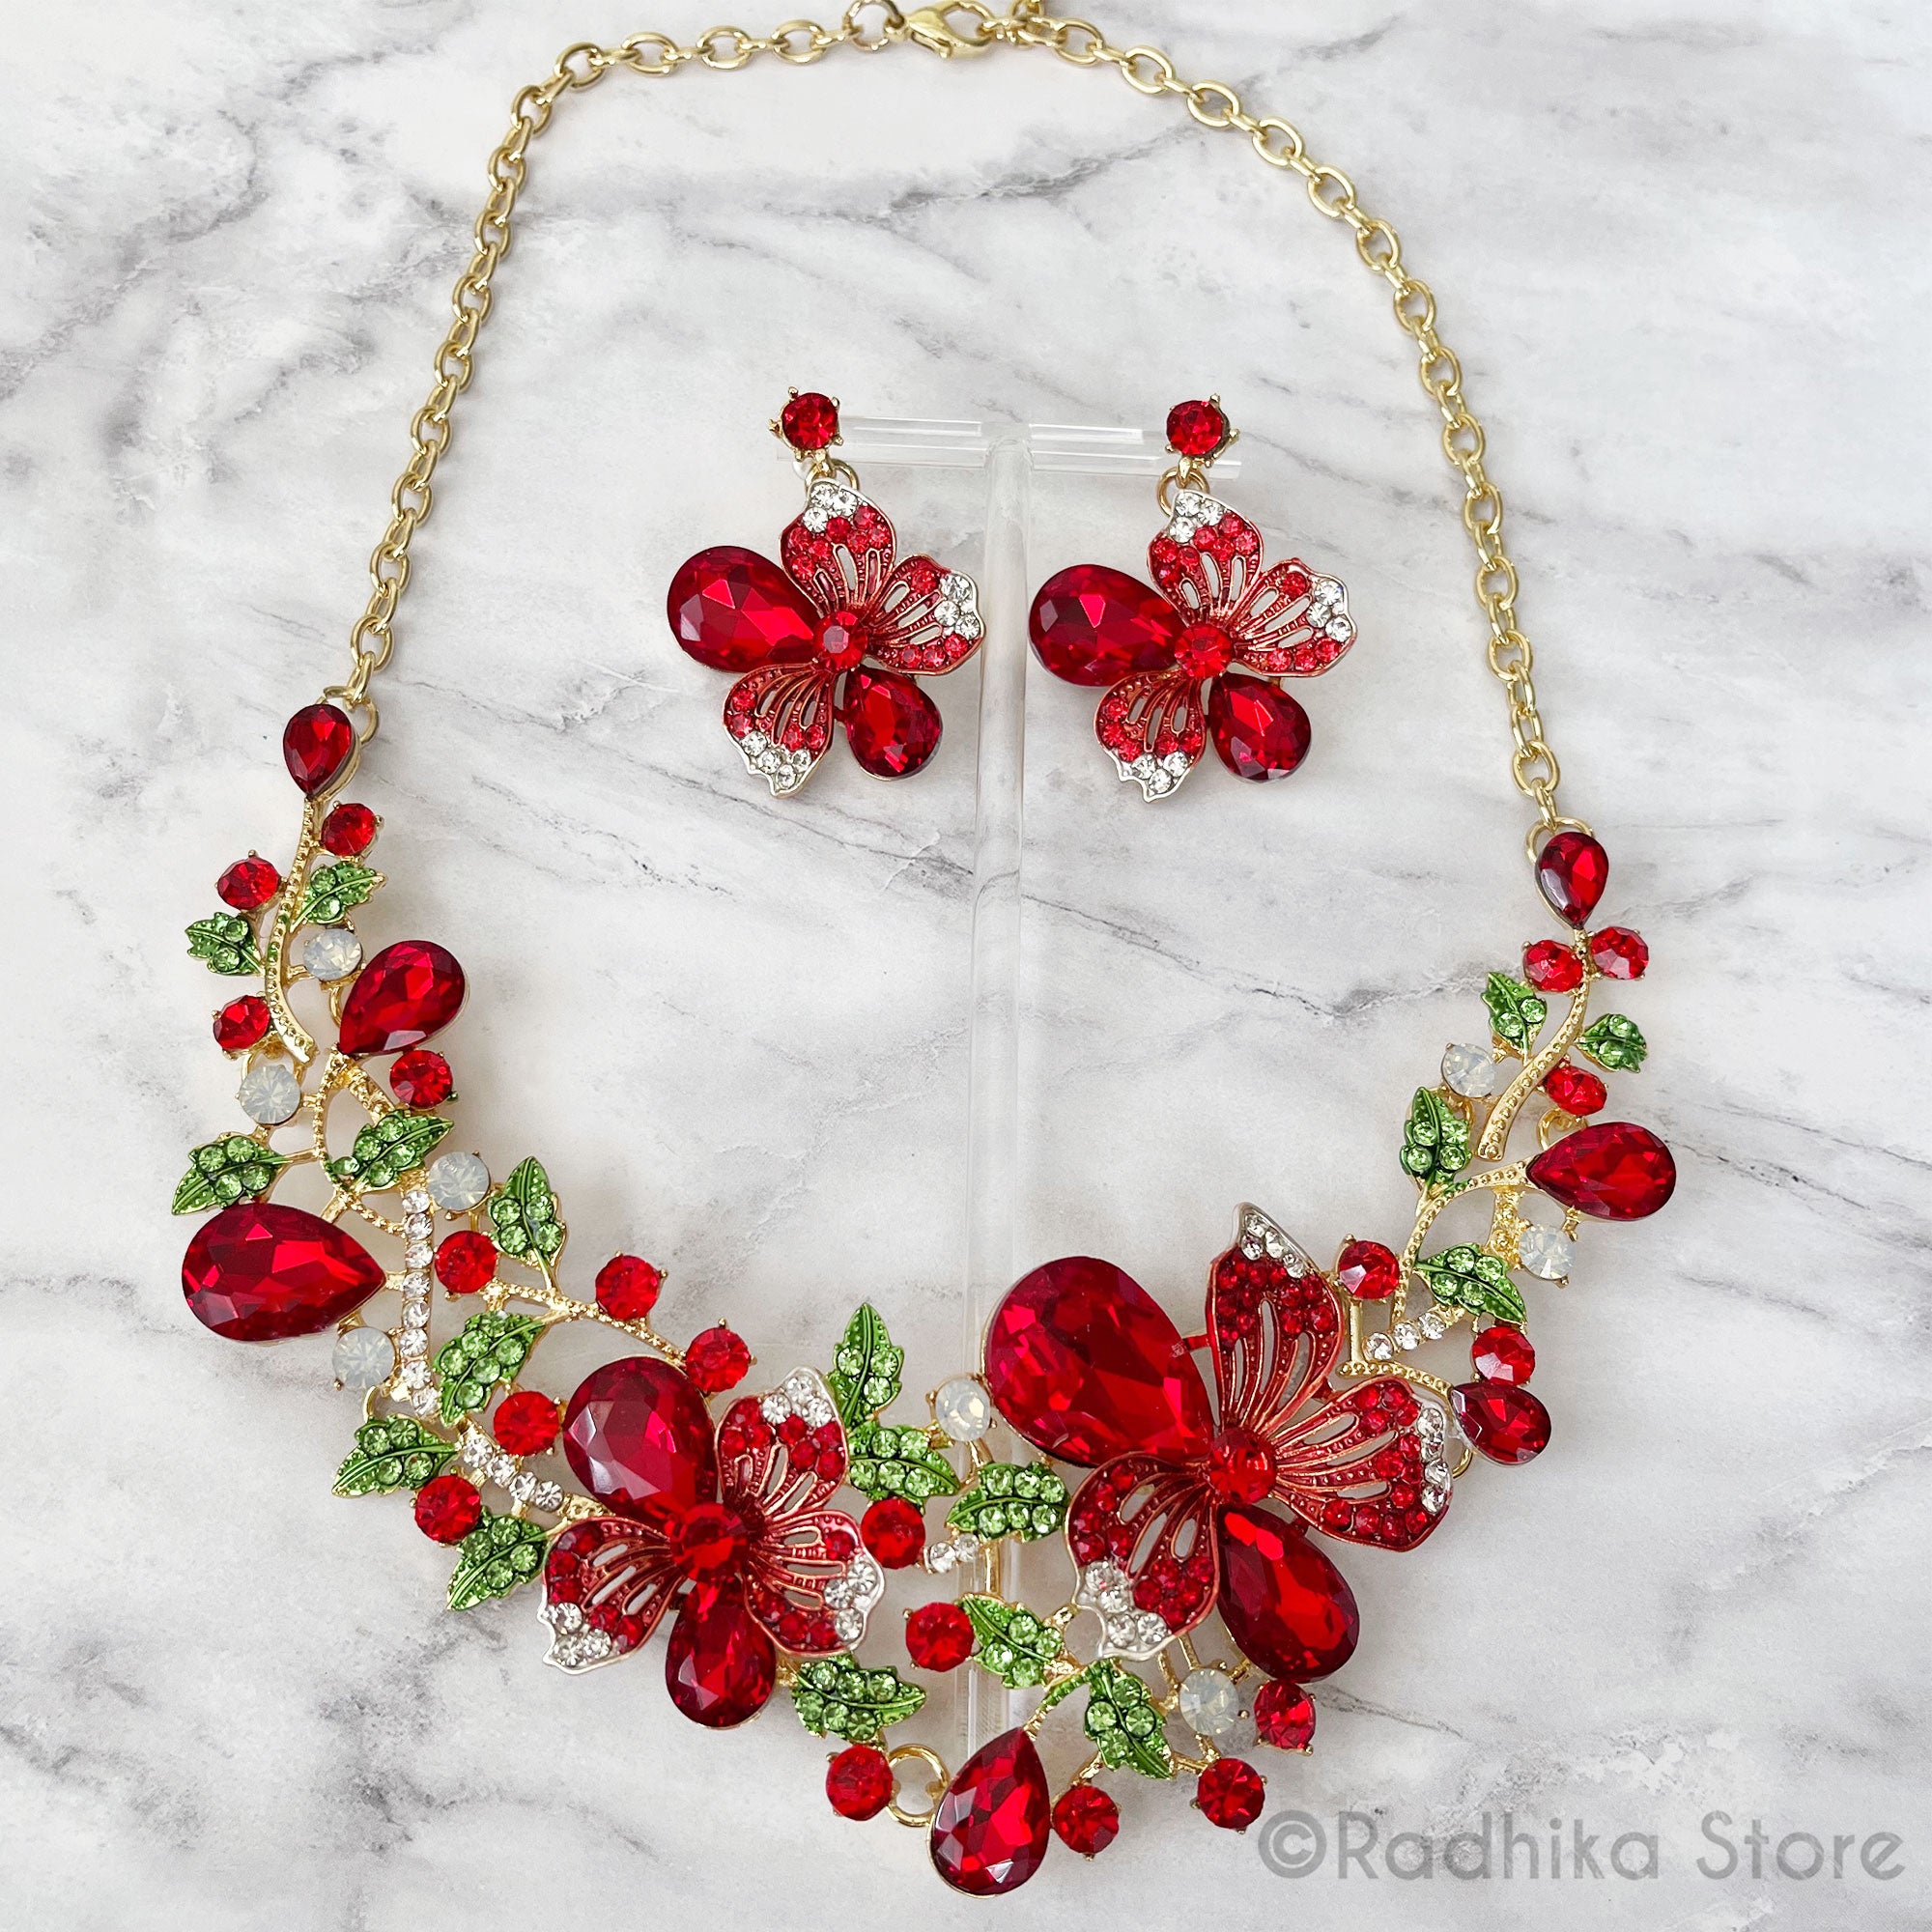 Festival Flowers-Red and Green Crystals-Deity Necklace And Earring Set